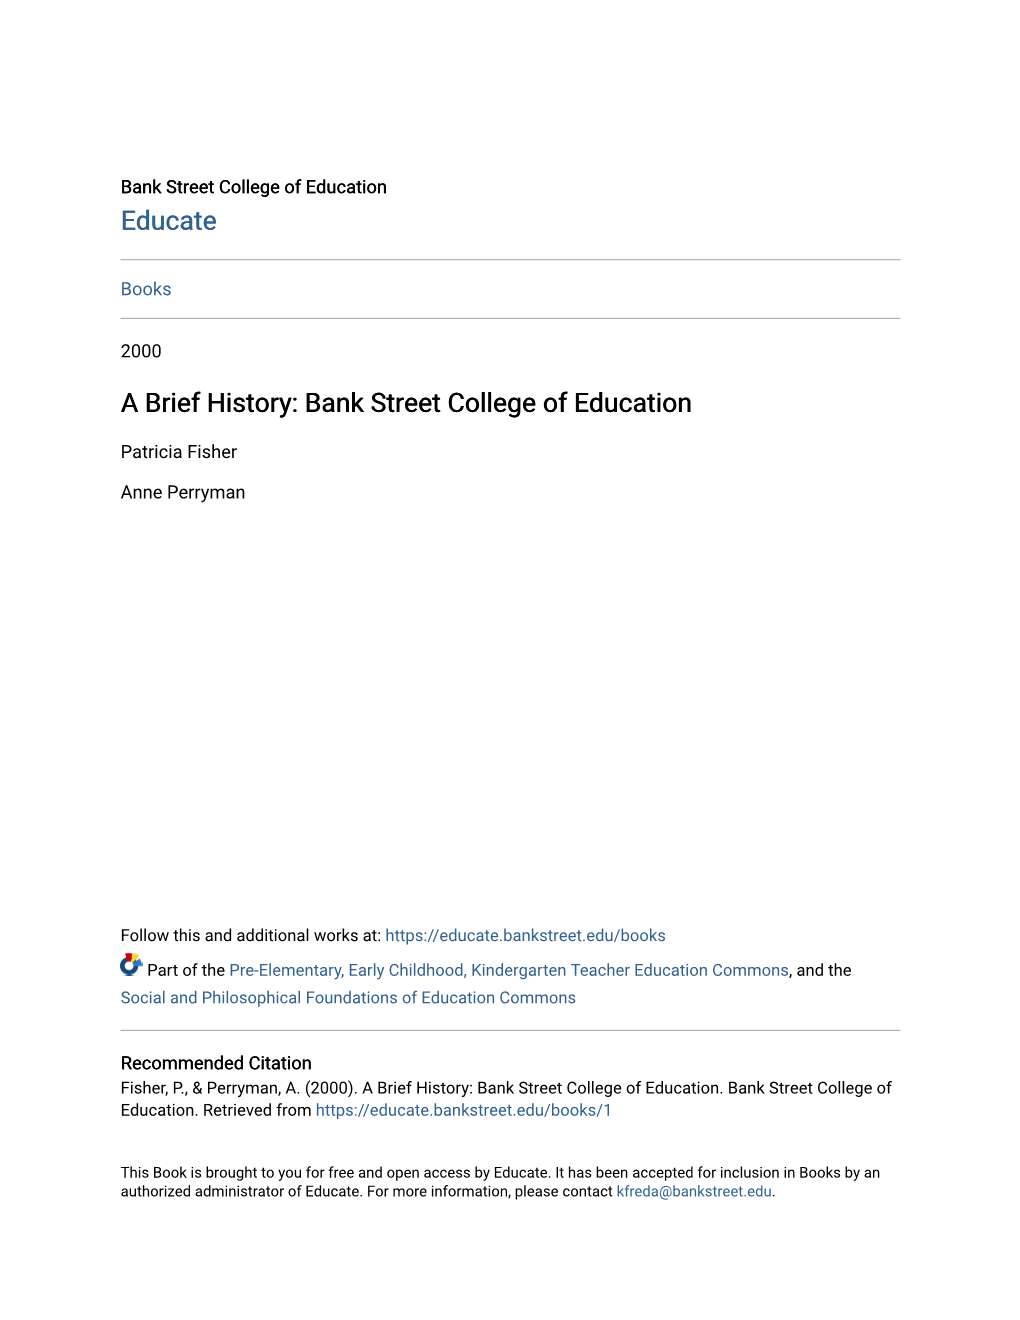 A Brief History: Bank Street College of Education